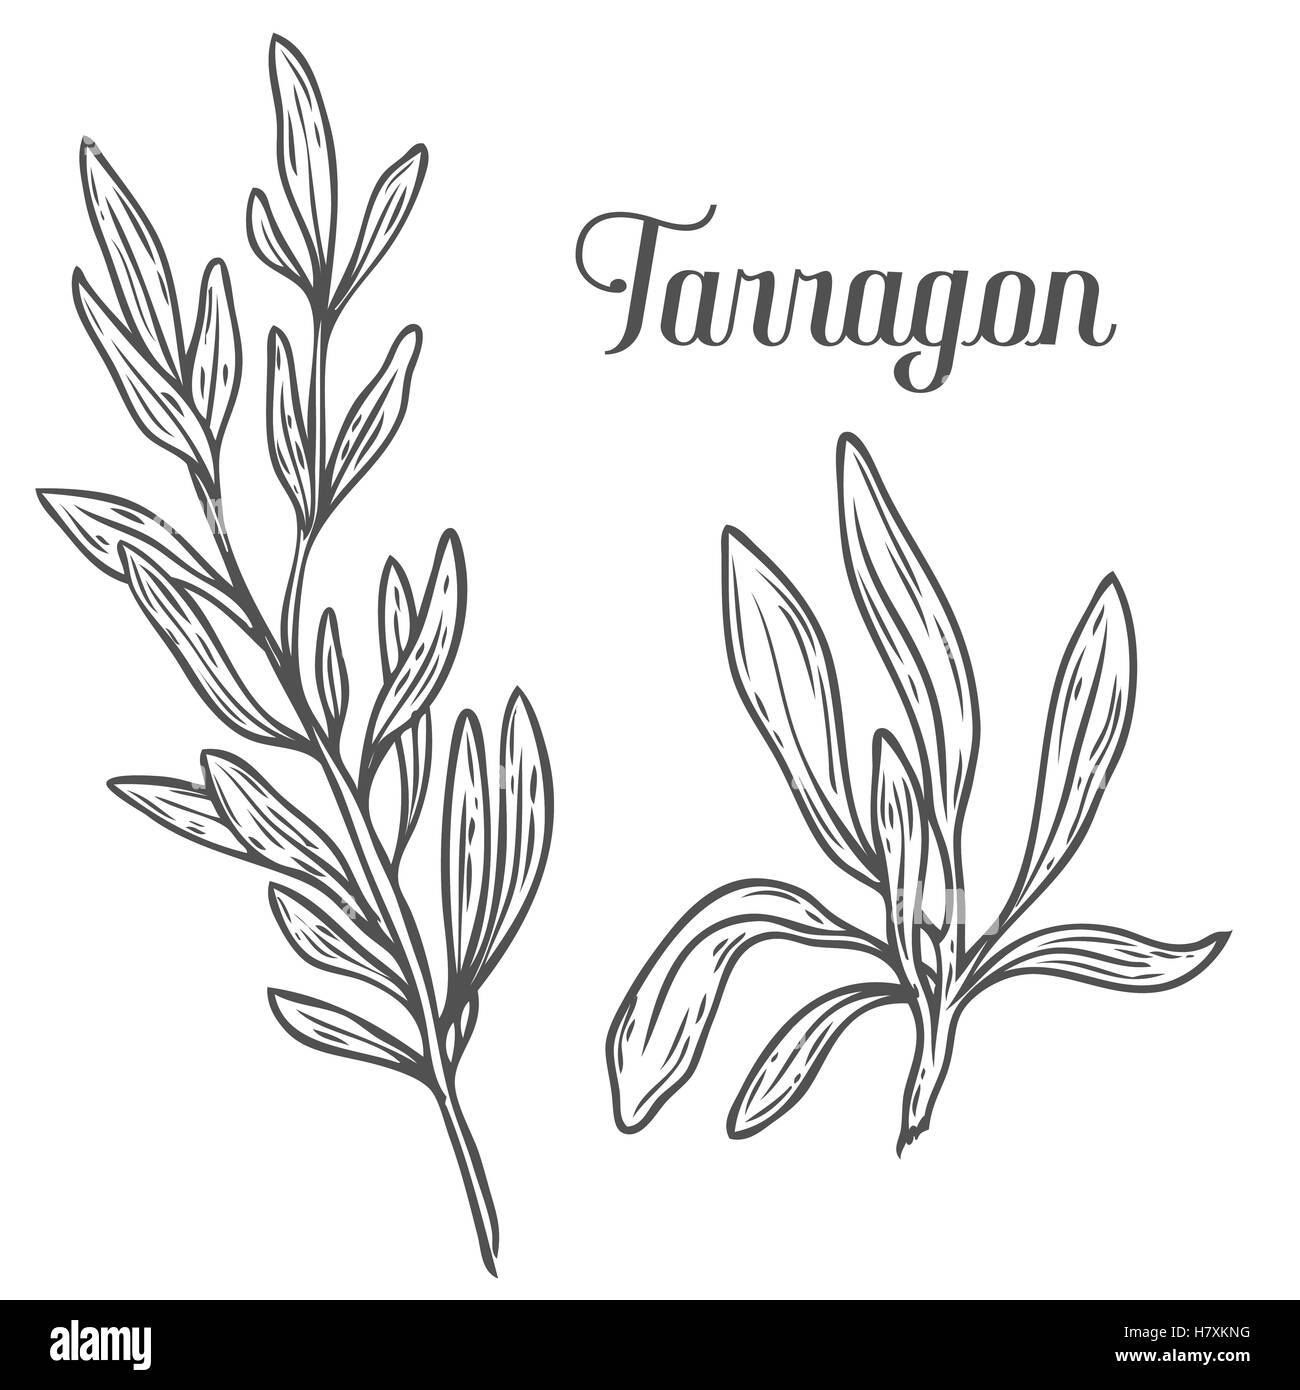 French tarragon, Artemisia dracunculus sativa vector hand drawn sketch illustration. Culinary herb for cooking, medical, gardeni Stock Vector